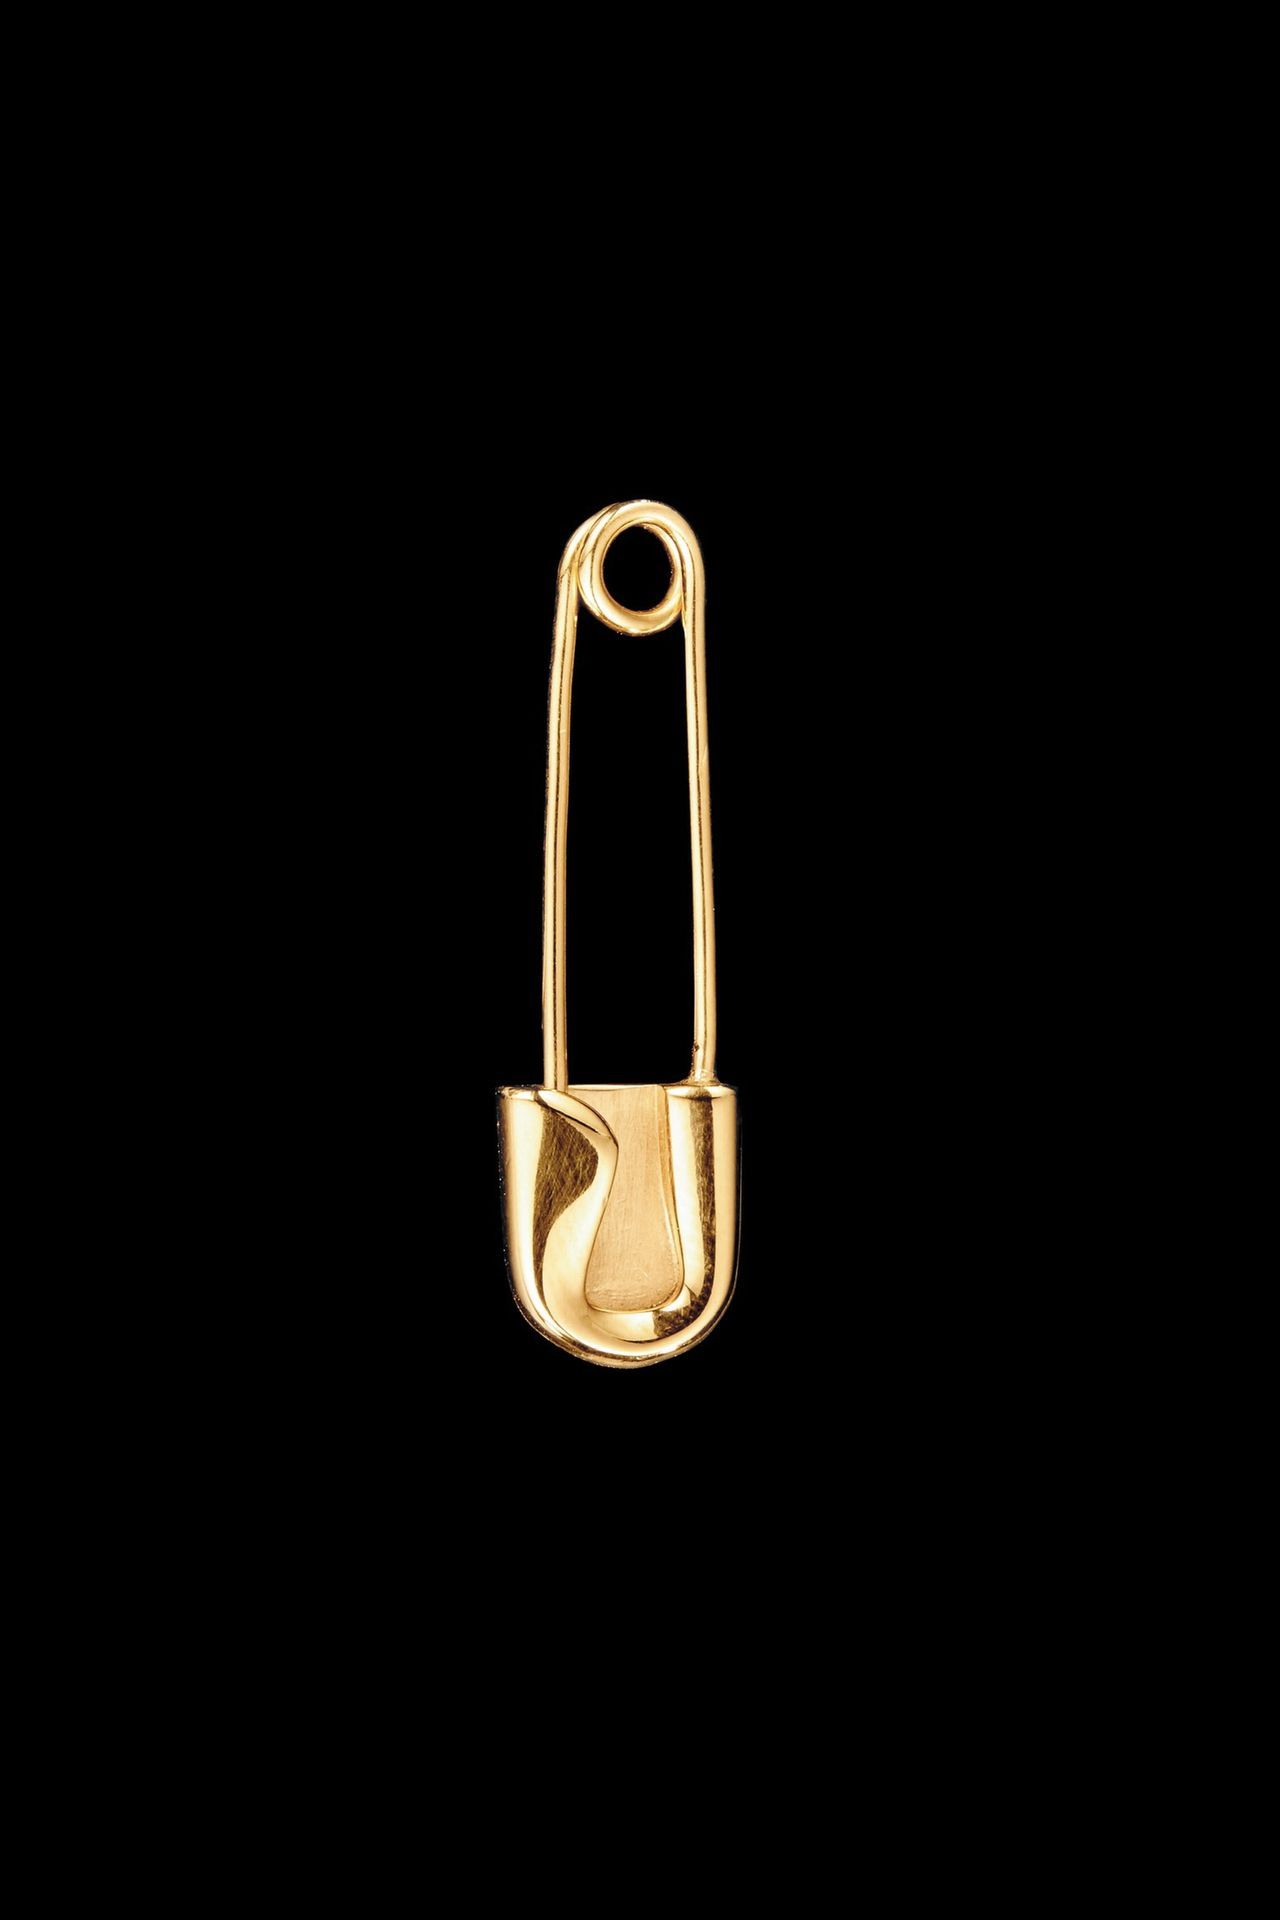 Attached 2 U Gold Earring (Left)